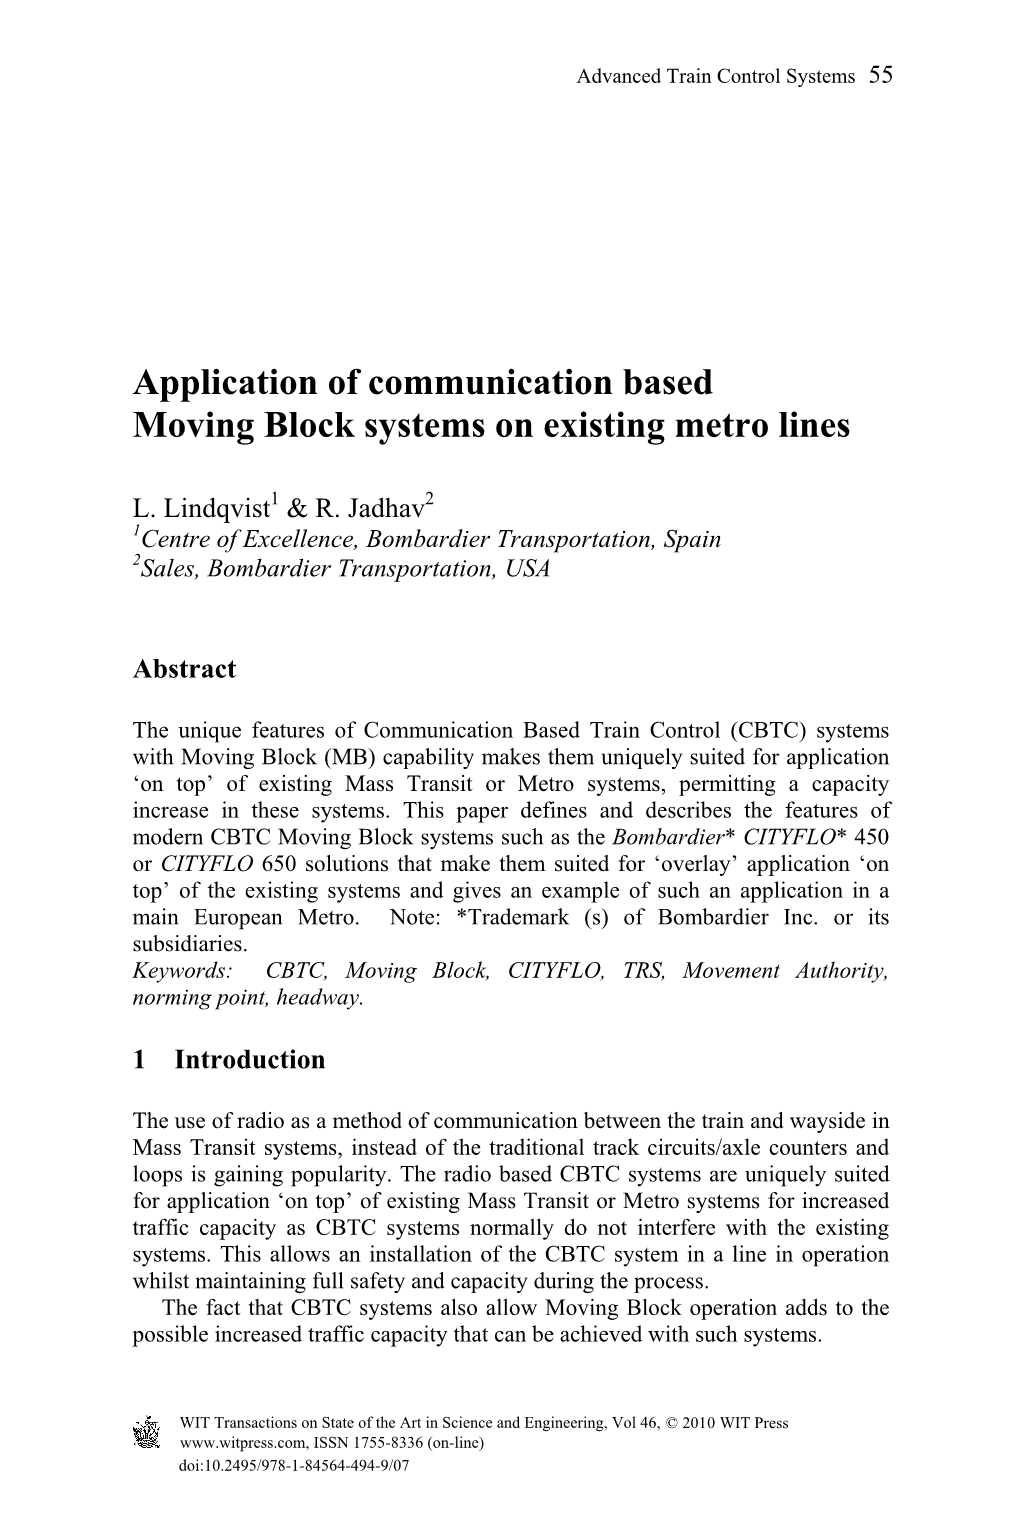 Application of Communication Based Moving Block Systems on Existing Metro Lines